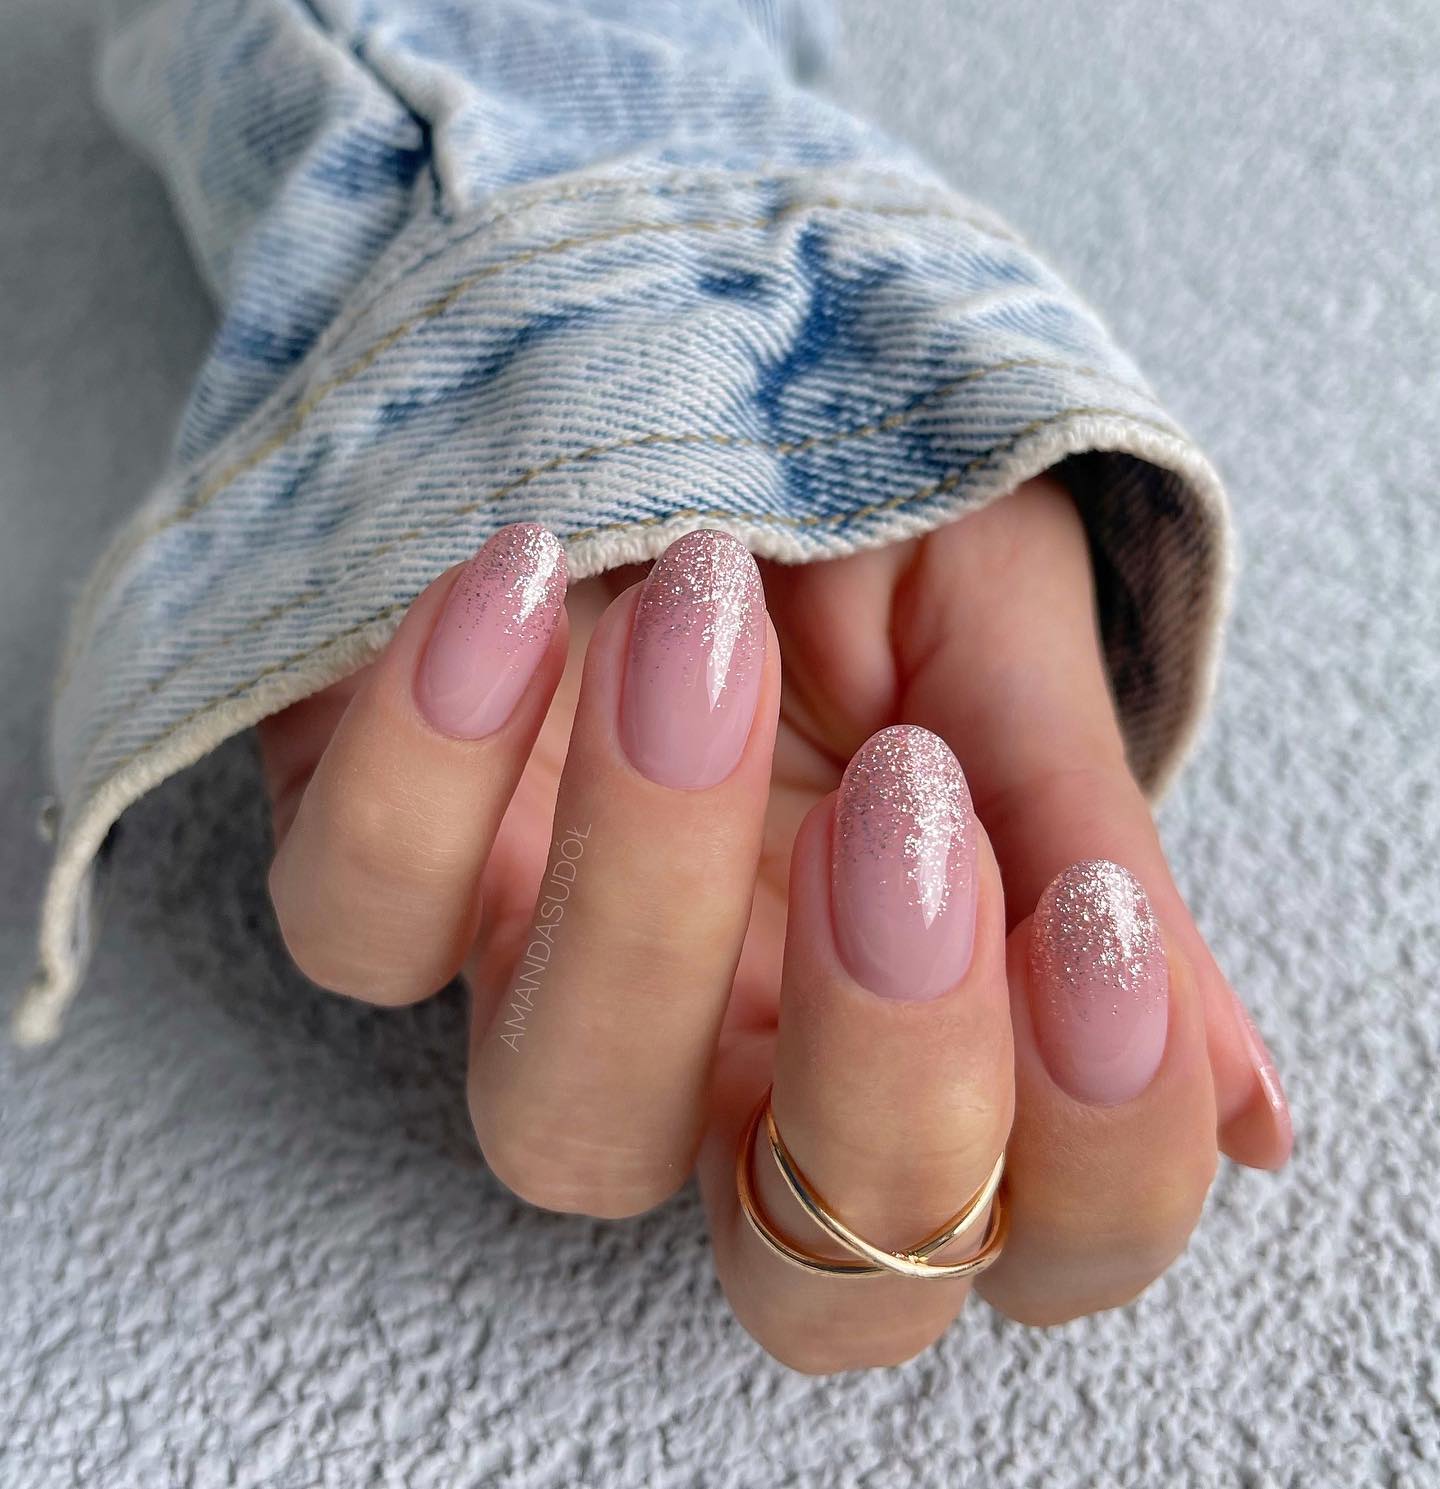 ombre with french outline on gel x nails｜TikTok Search-seedfund.vn